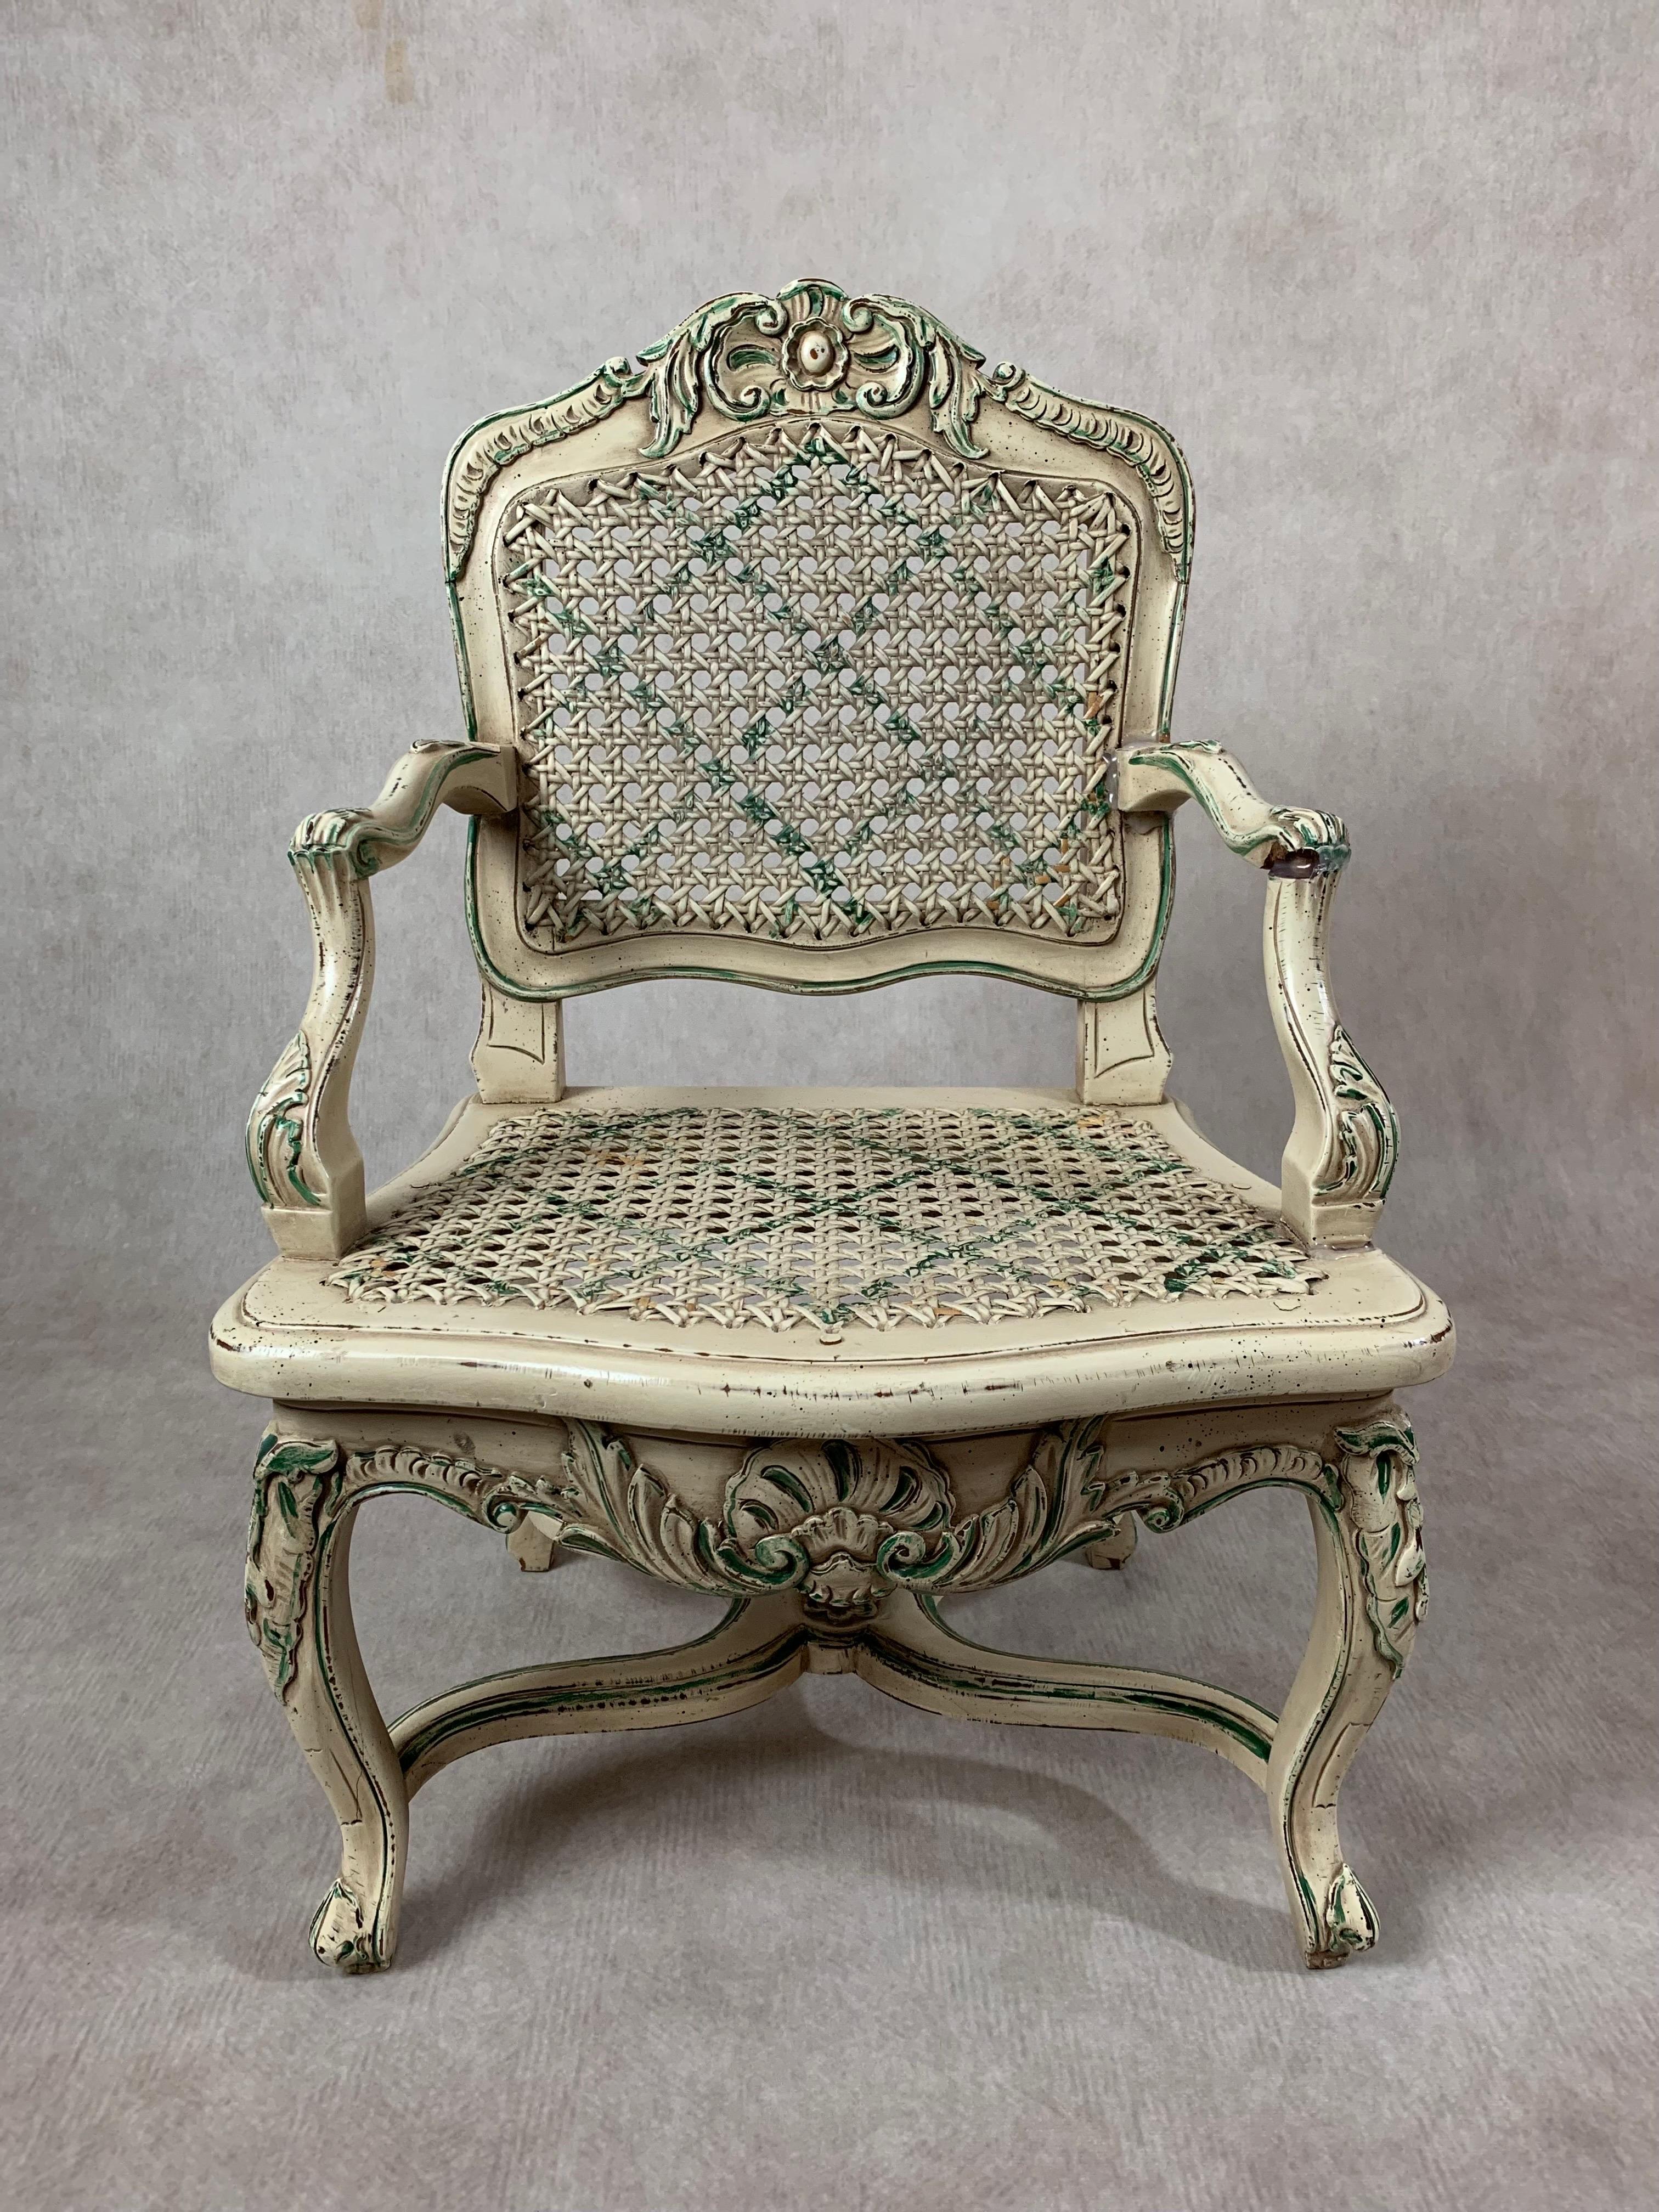 A darling pair of miniature Louis XVI style caned arm chairs featuring ornately carved and cast scrollwork with hand-painted details, cabriole legs, caned back and seat. One chair displays green accents and the other salmon pink. 

Perfect for